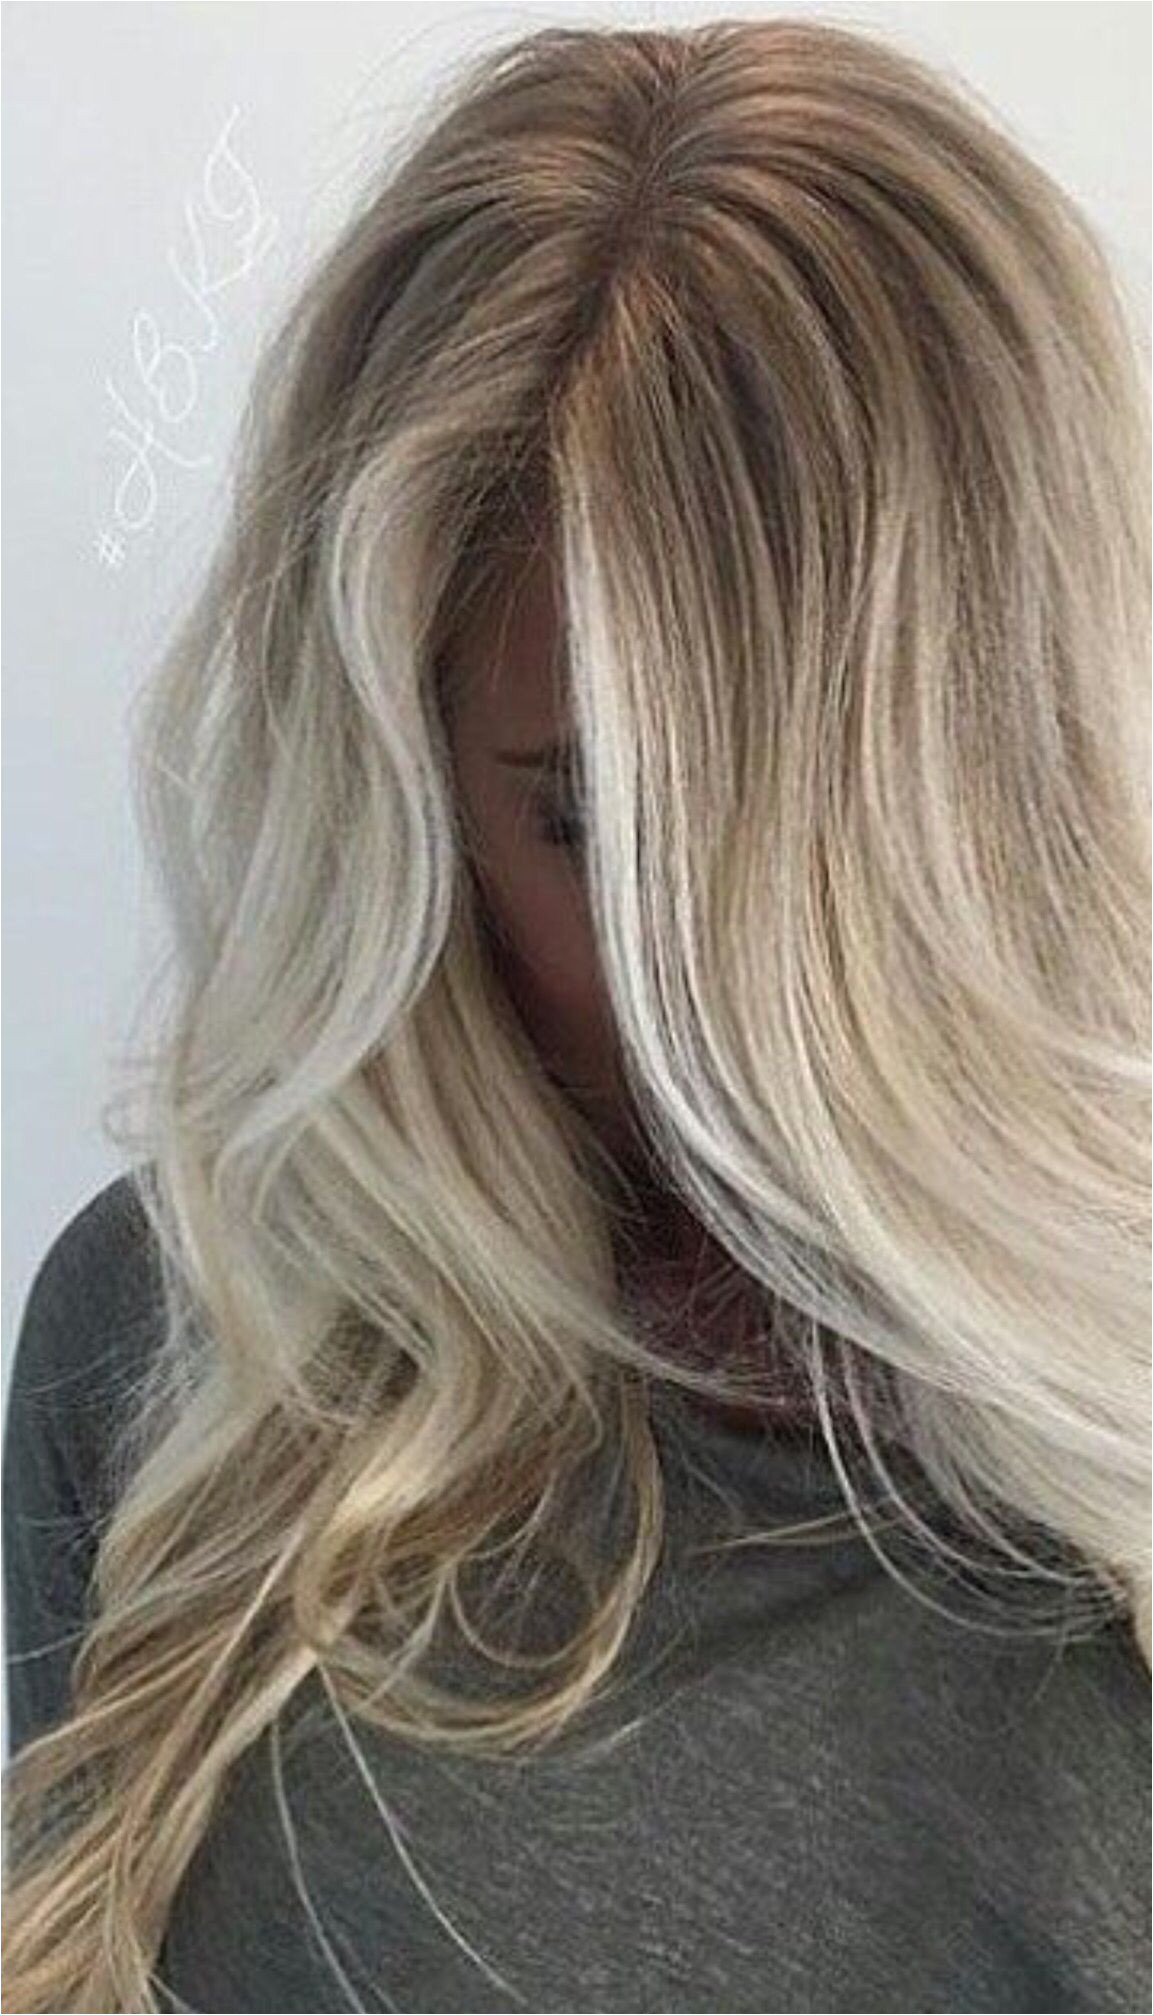 natural blonde highlights lighter in front So natural easy to grow out so its low maintenance